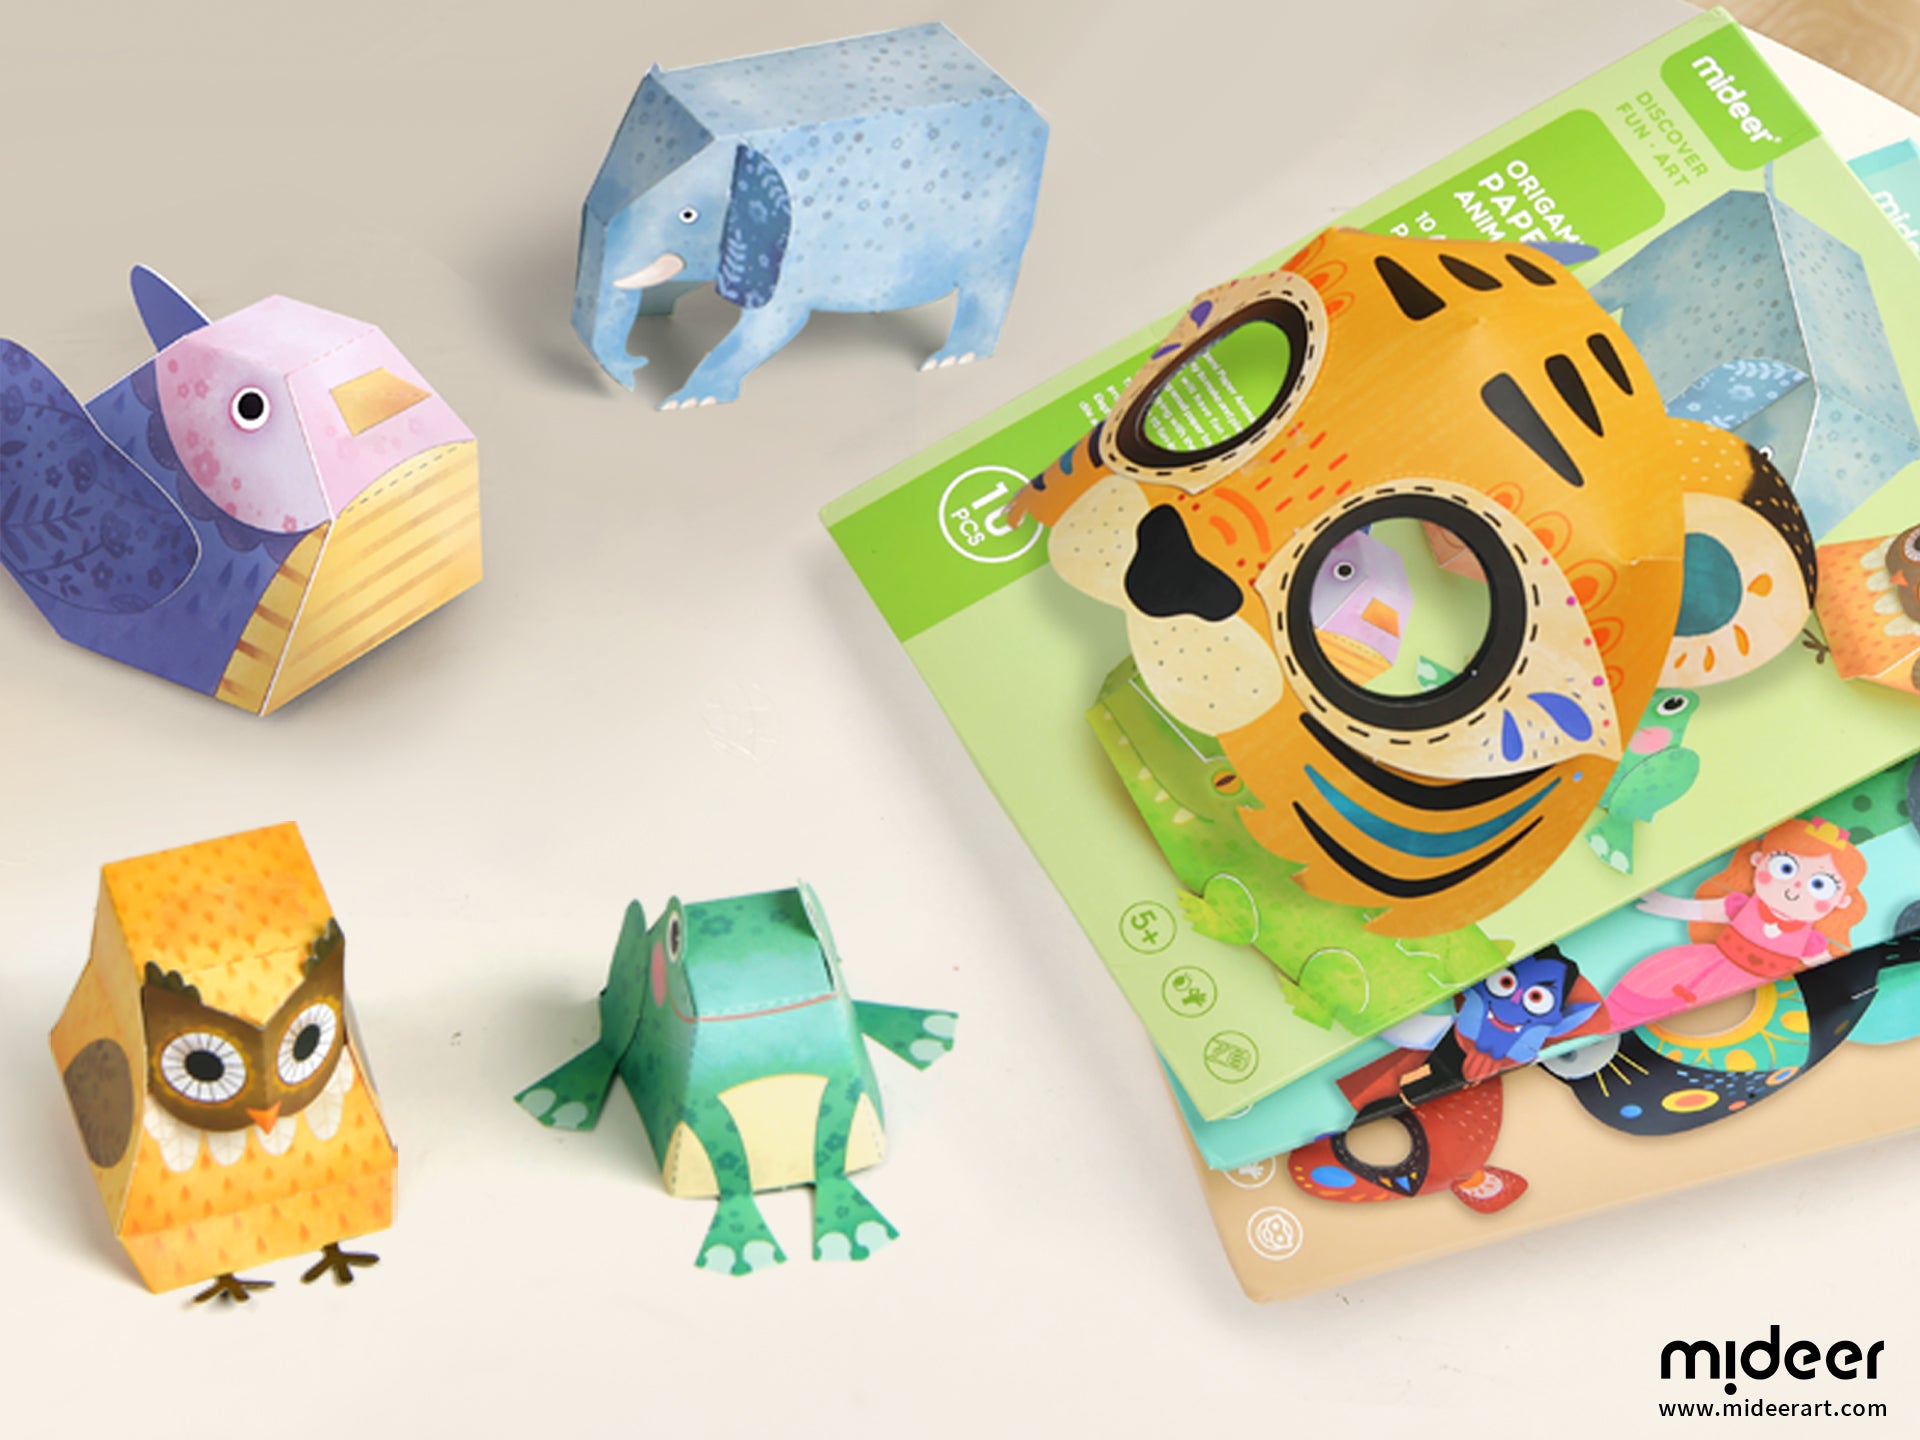 What is the Most Popular Origami Paper for Kids?